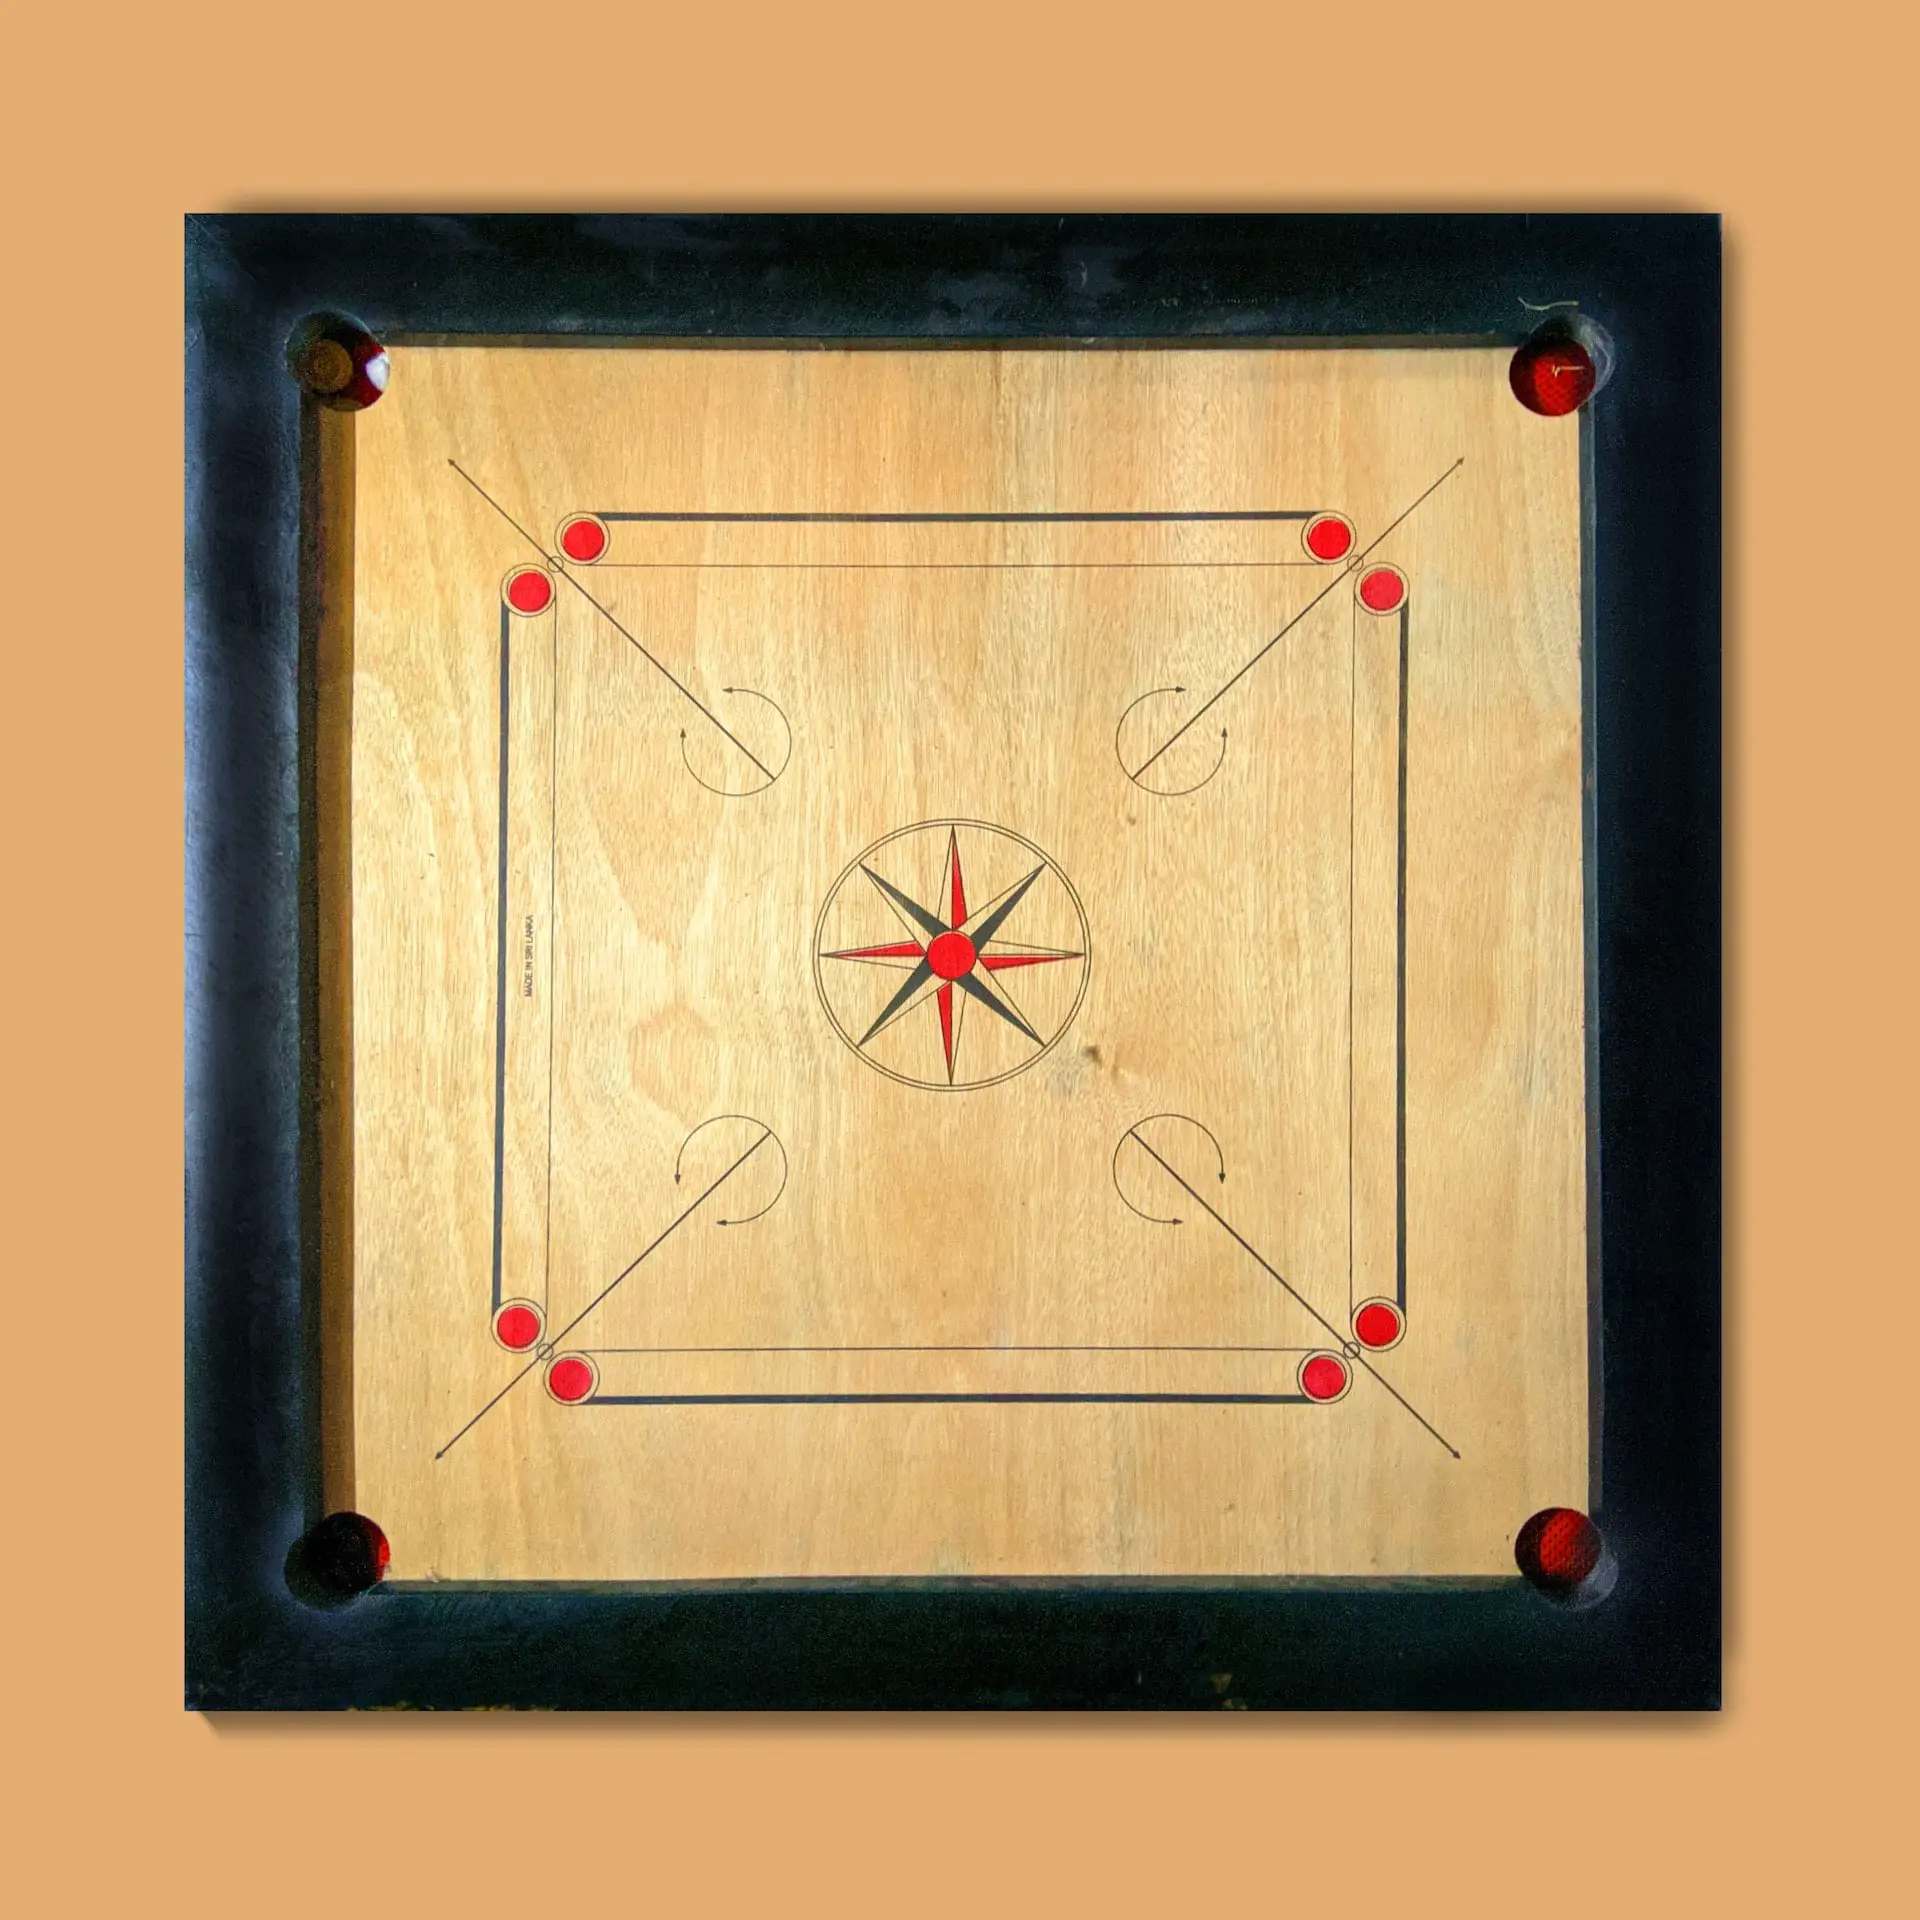 Where Can I Buy a Carrom Board in USA